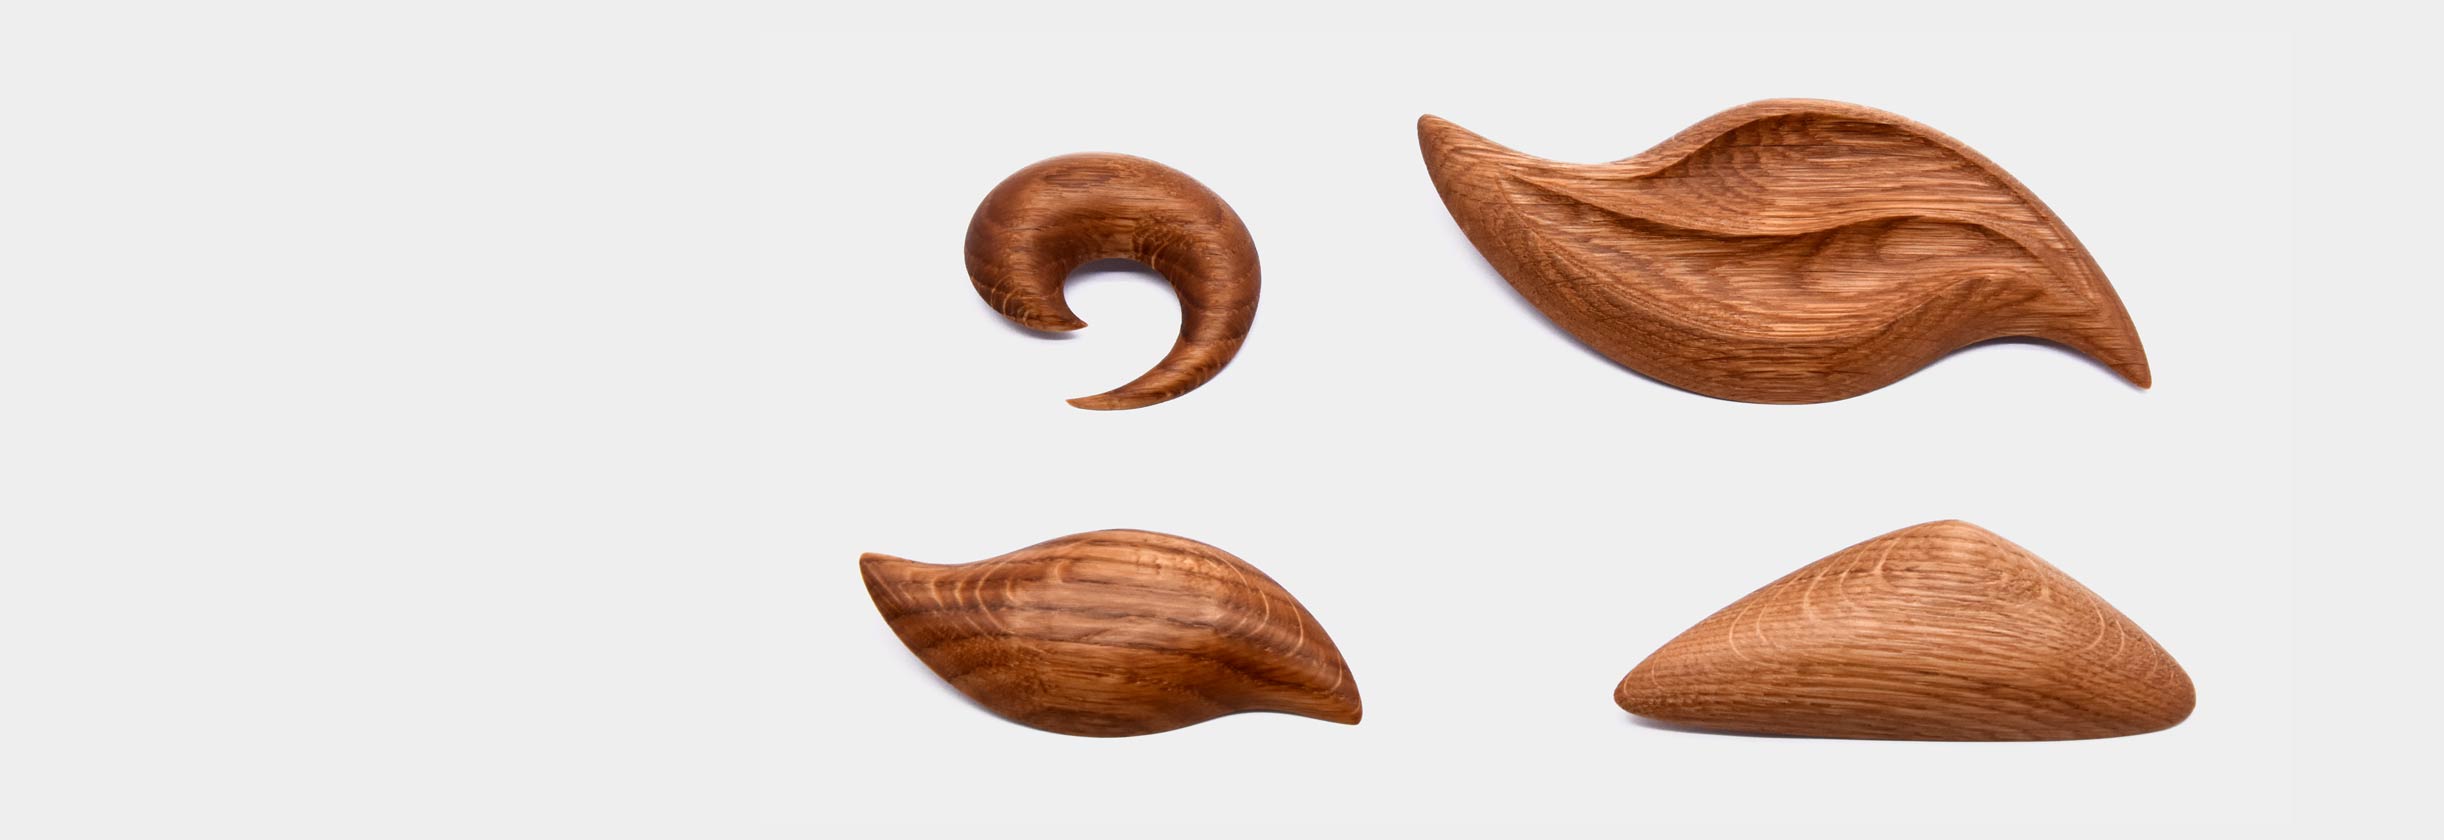 Wooden brooches from oak